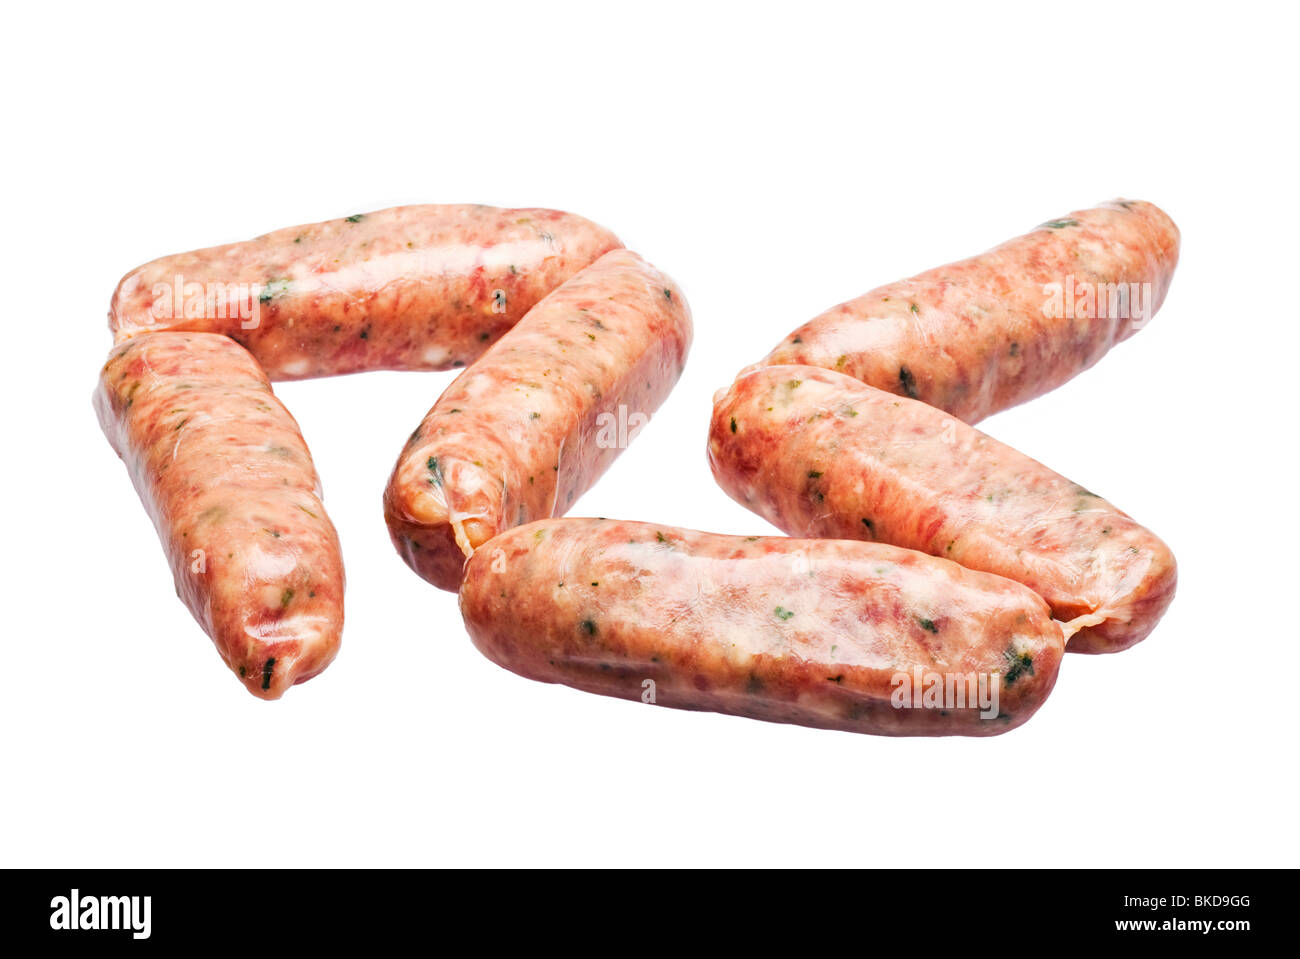 Pork and herb sausages on white Stock Photo